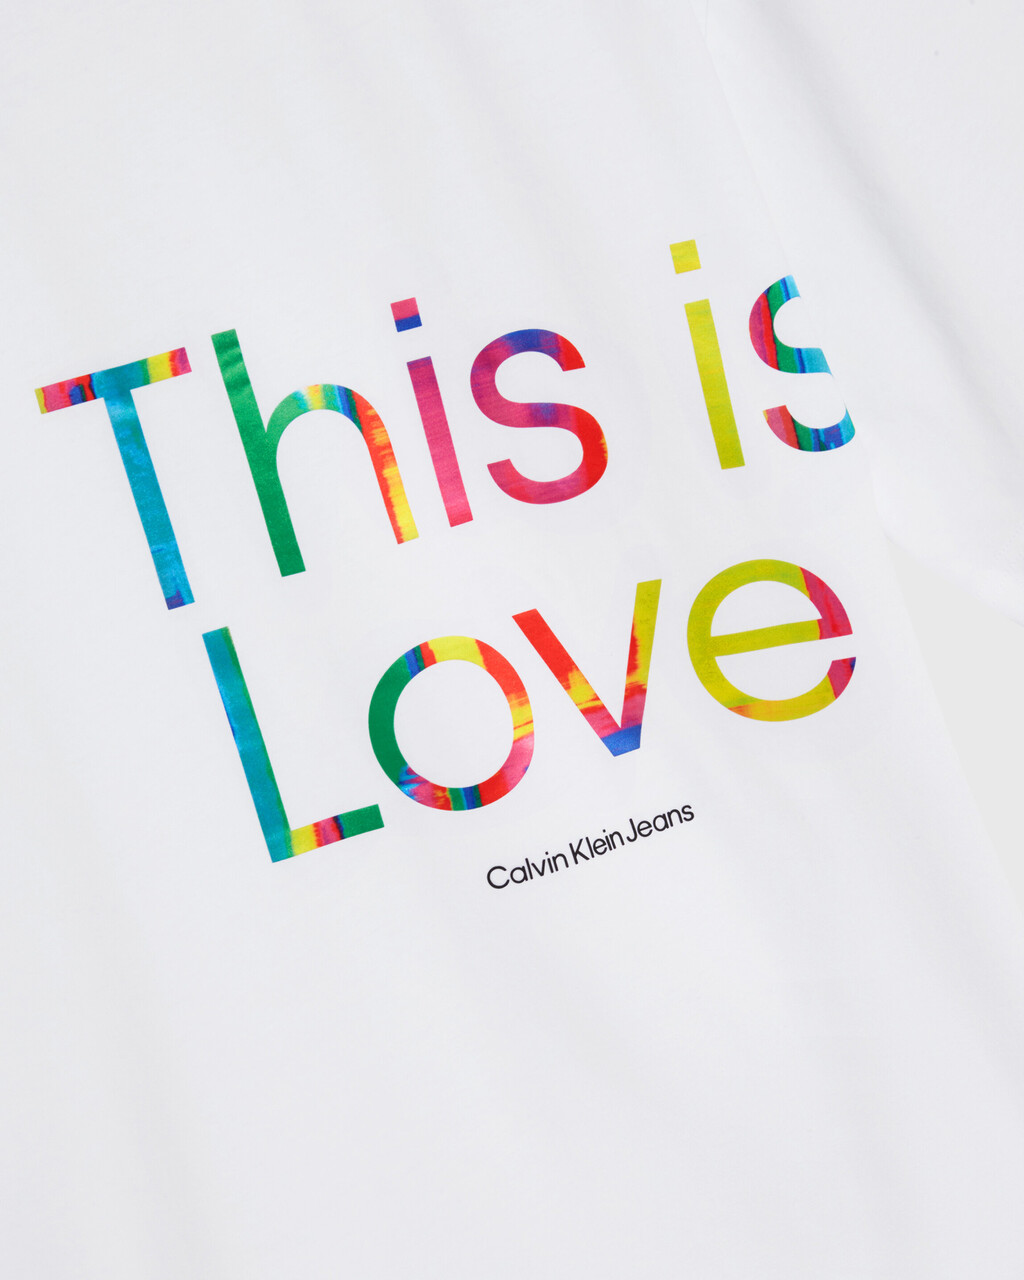 Pride Capsule Relaxed Tee, Bright White, hi-res